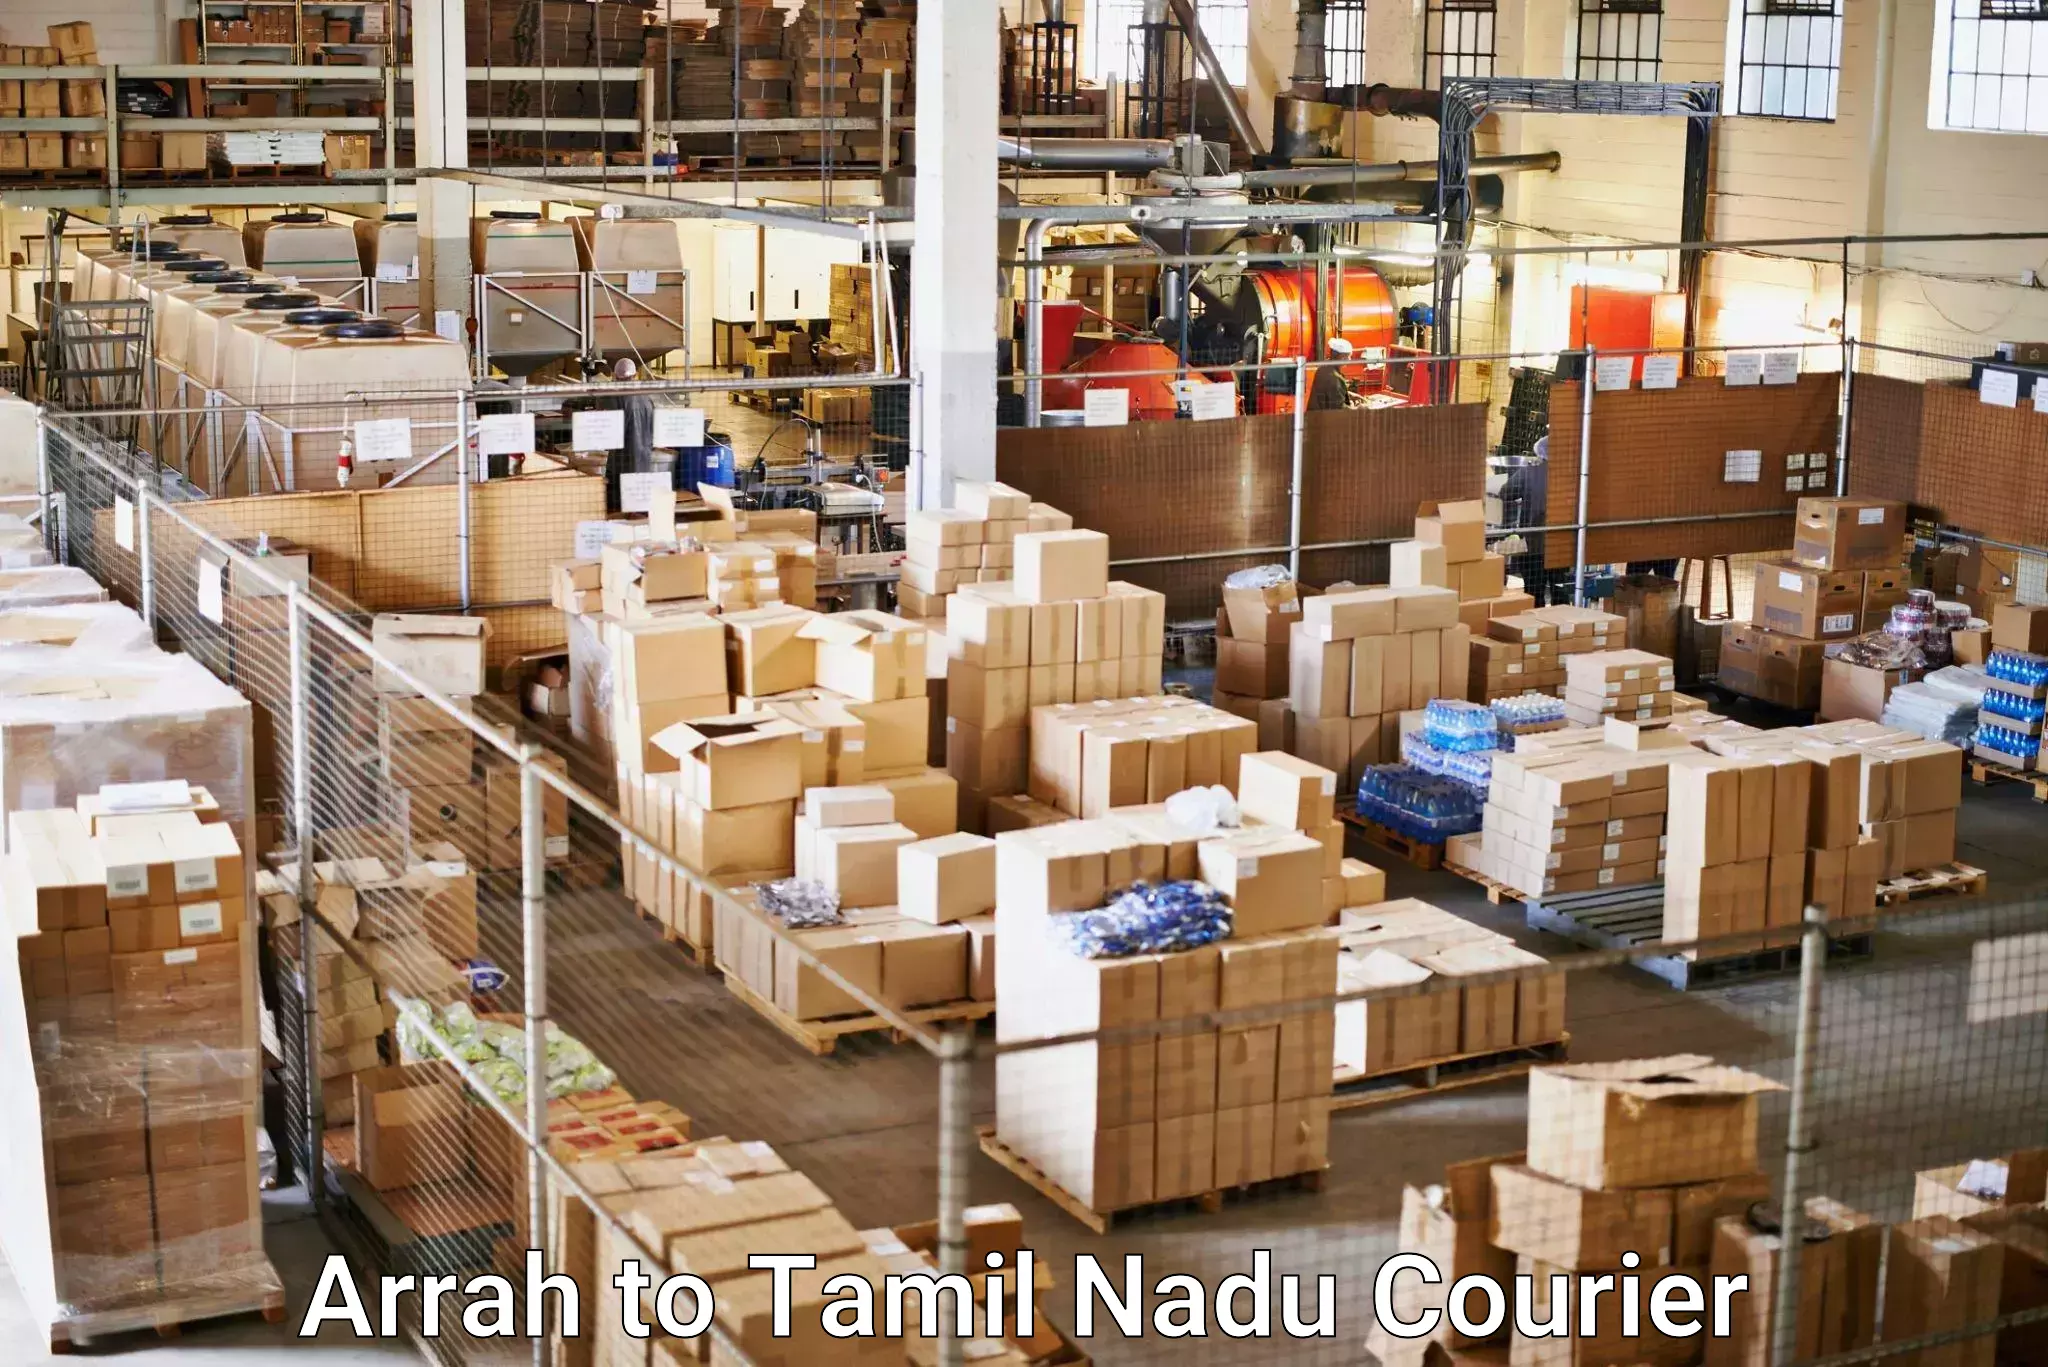 Tailored delivery services Arrah to Ambattur